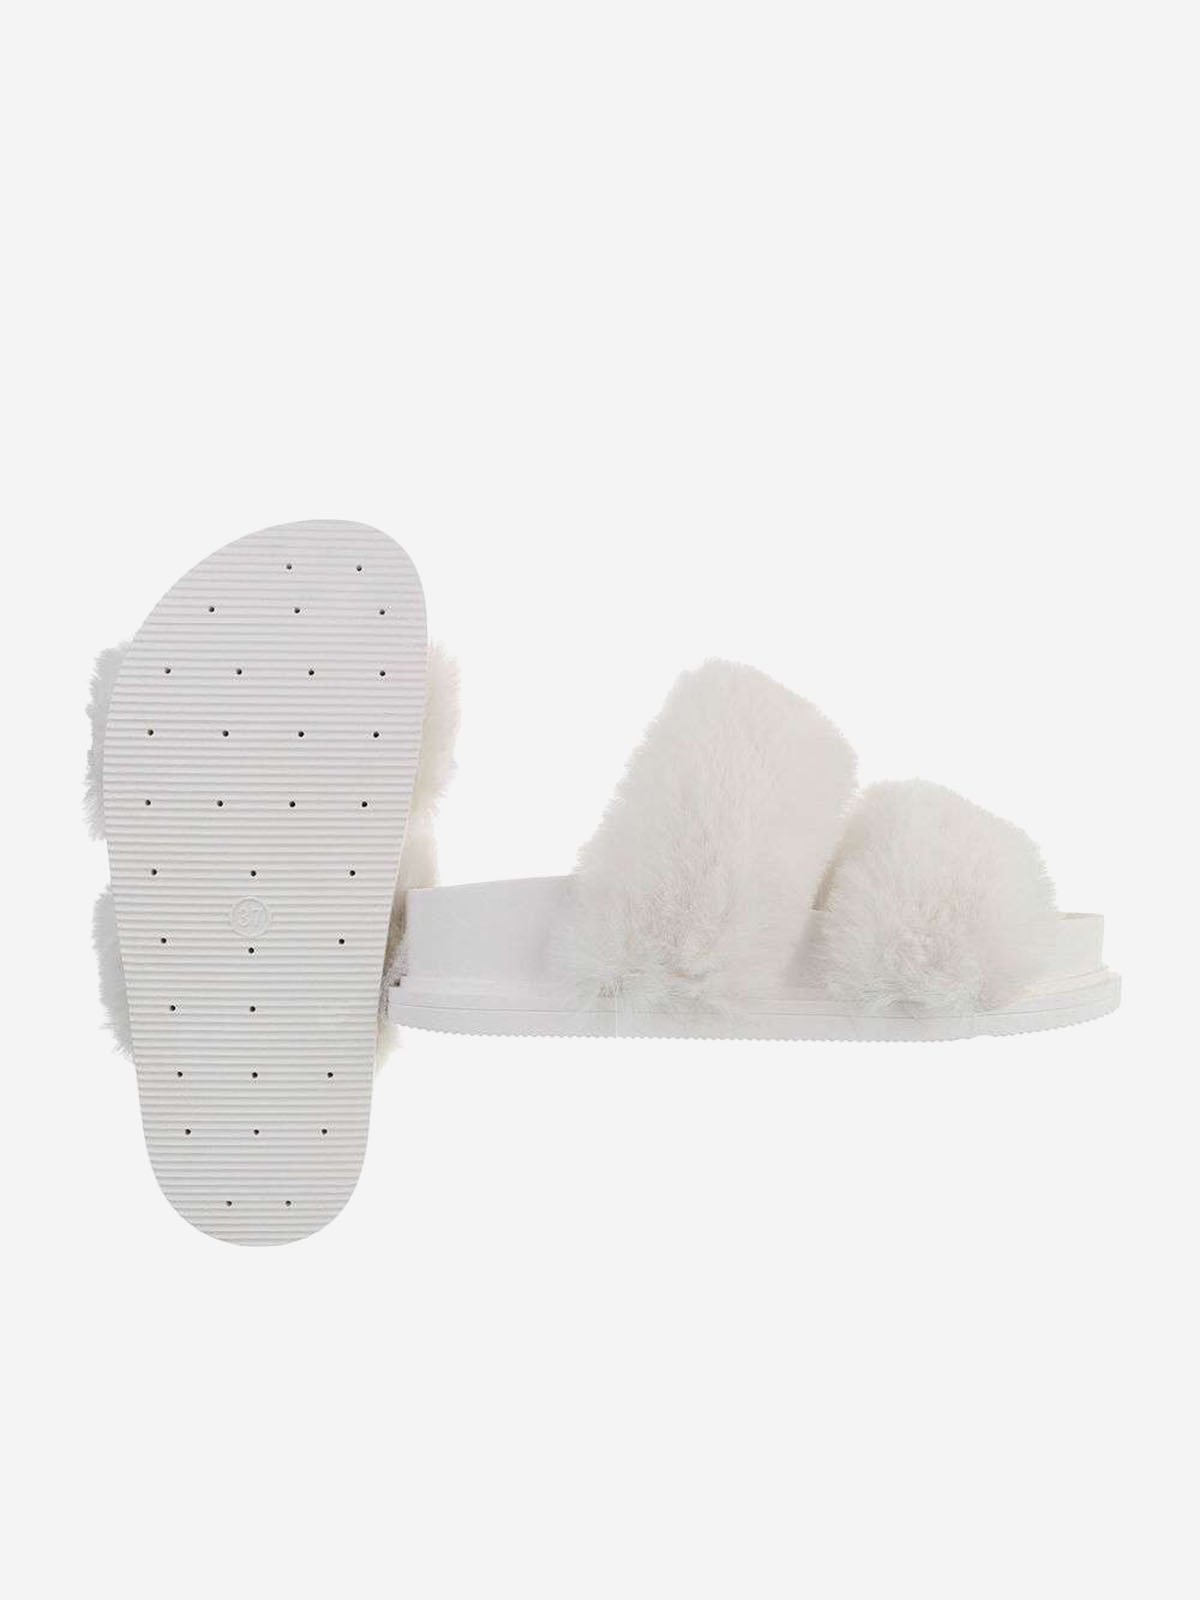 Oversize style slippers with fur in white